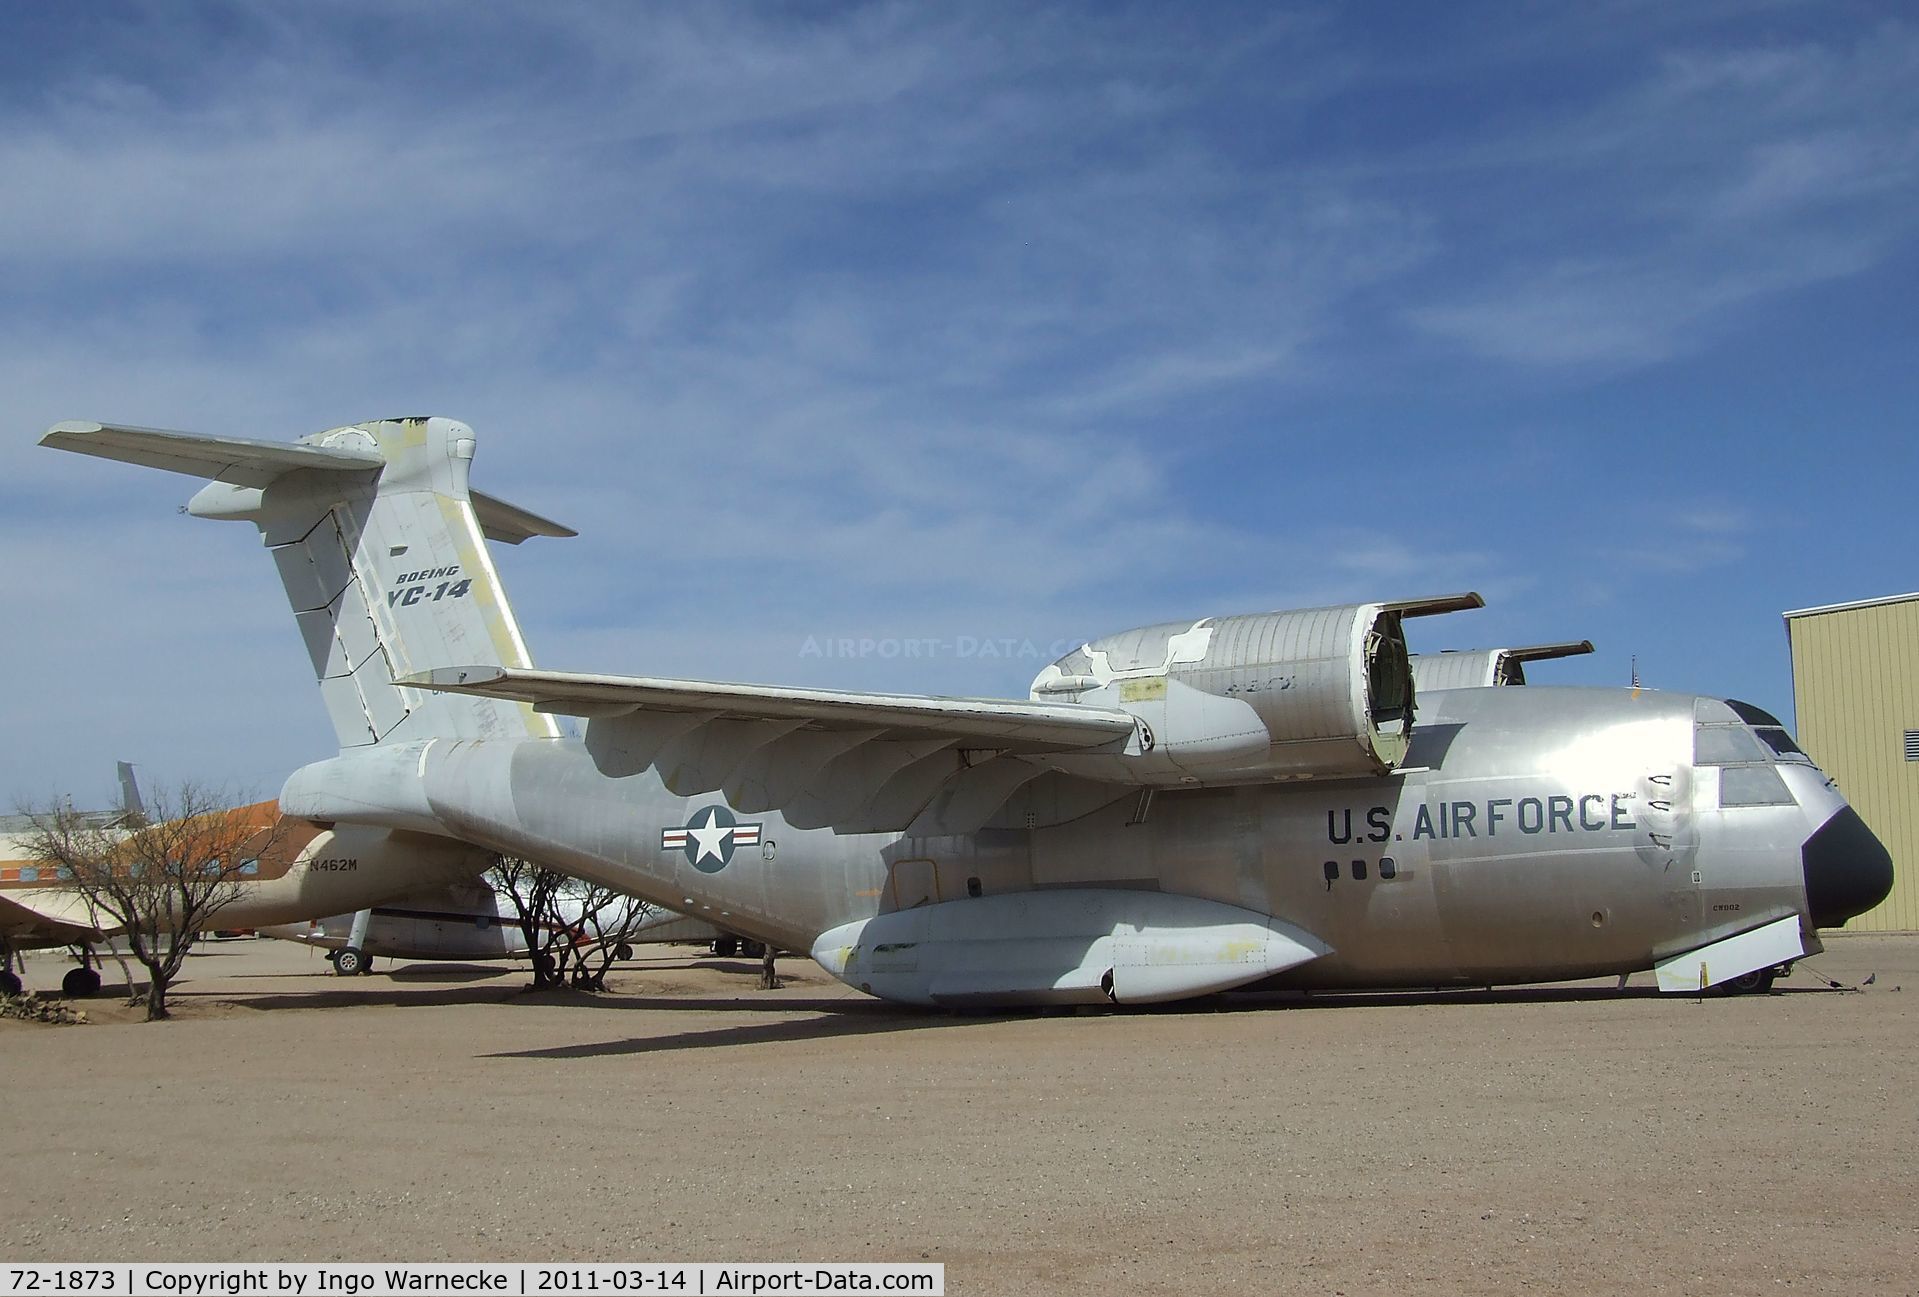 72-1873, 1972 Boeing YC-14A-BN C/N P 1, Boeing YC-14A (engines sadly still missing) at the Pima Air & Space Museum, Tucson AZ